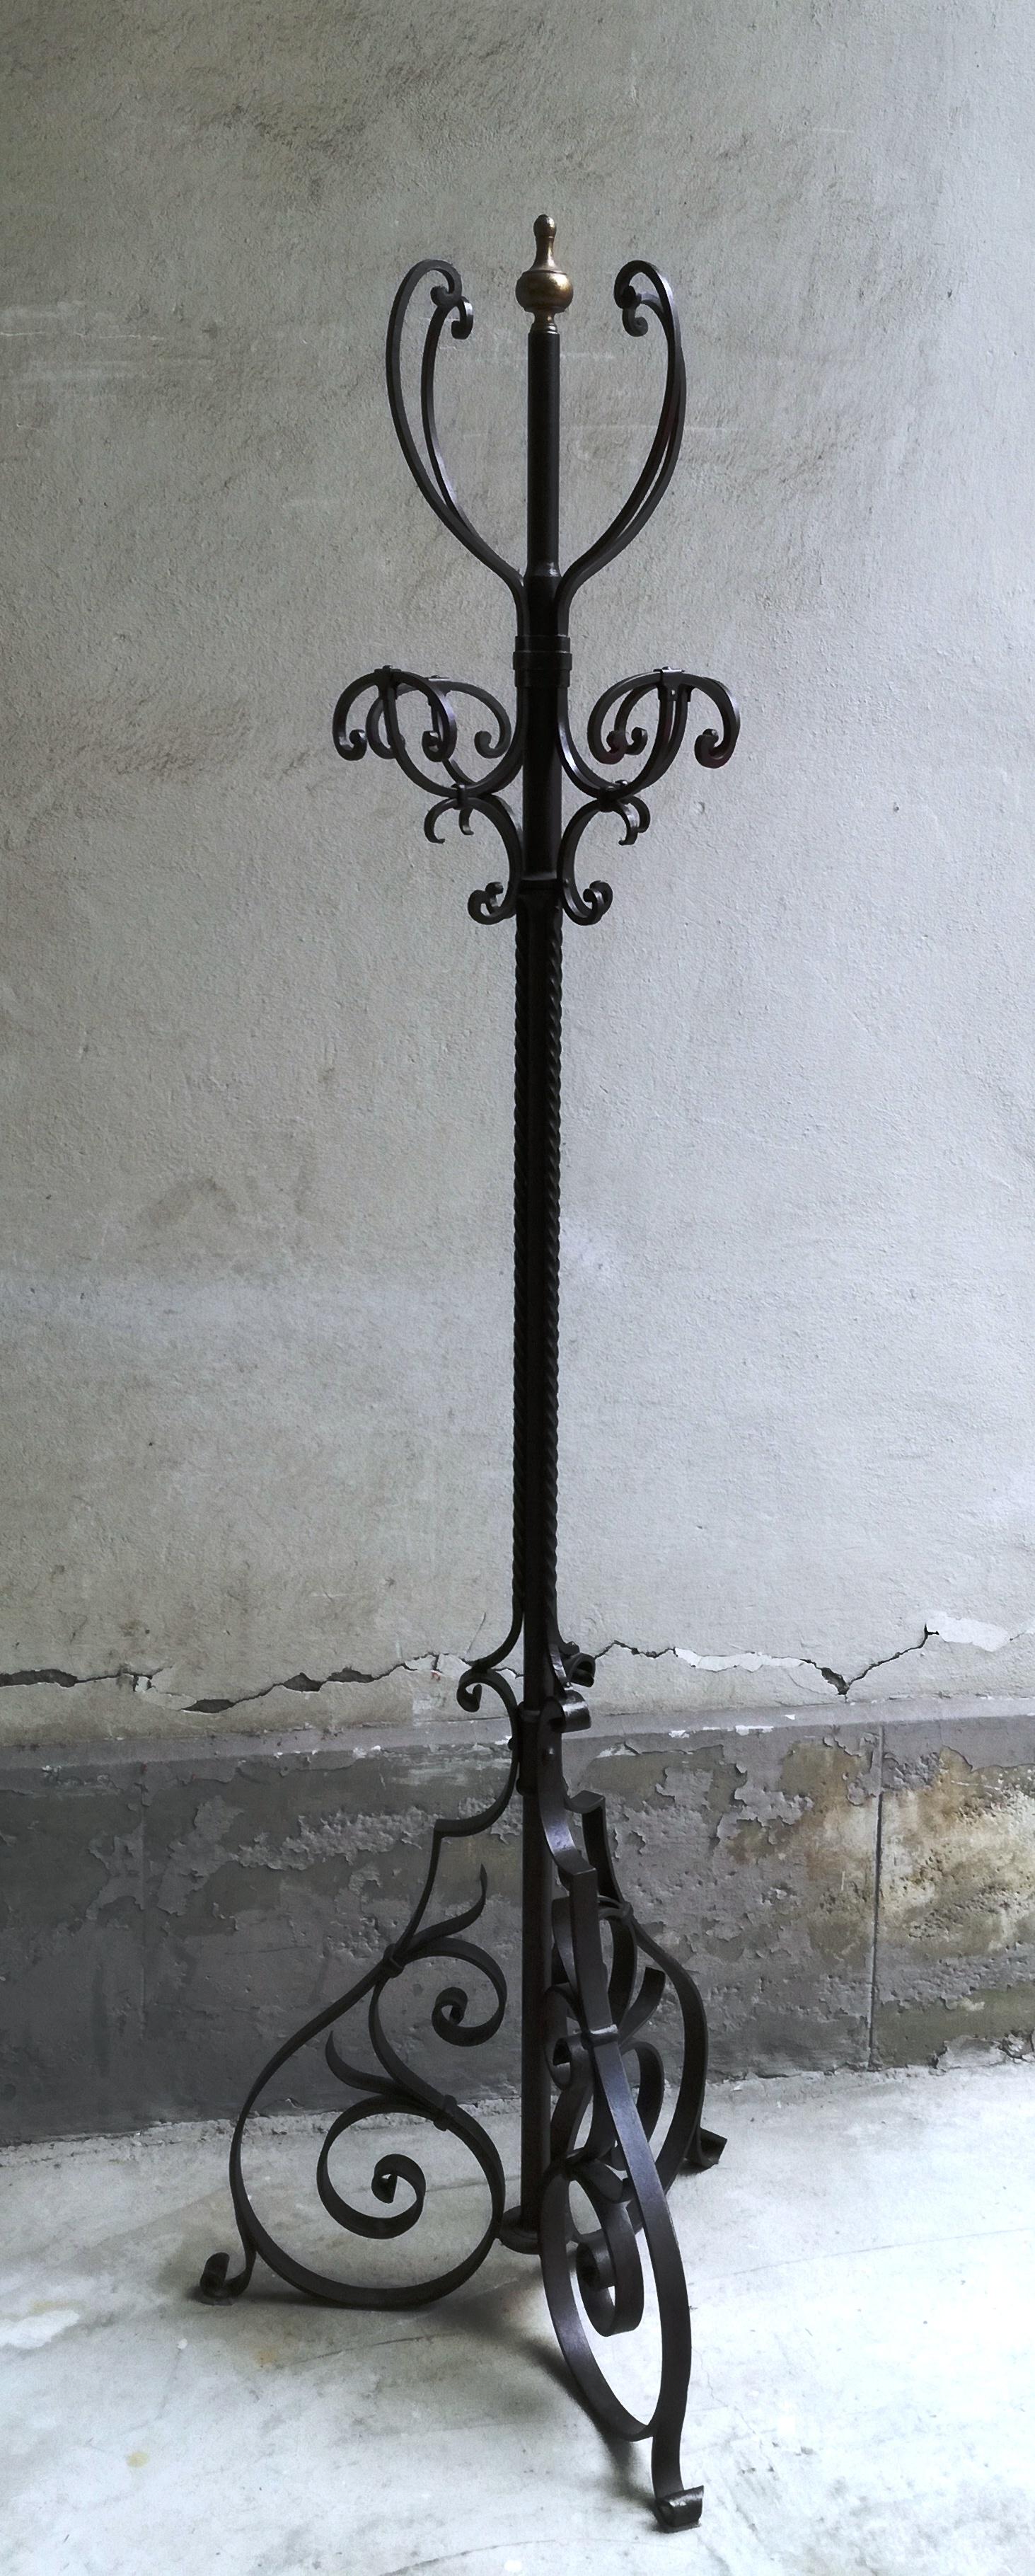 wrought iron coat stand, turn of the century. conceived and produced by skilled artisan blacksmith in the 1920s/30s. all handmade in the forge. very detailed. stable and very sturdy. weighs almost 30 kg.